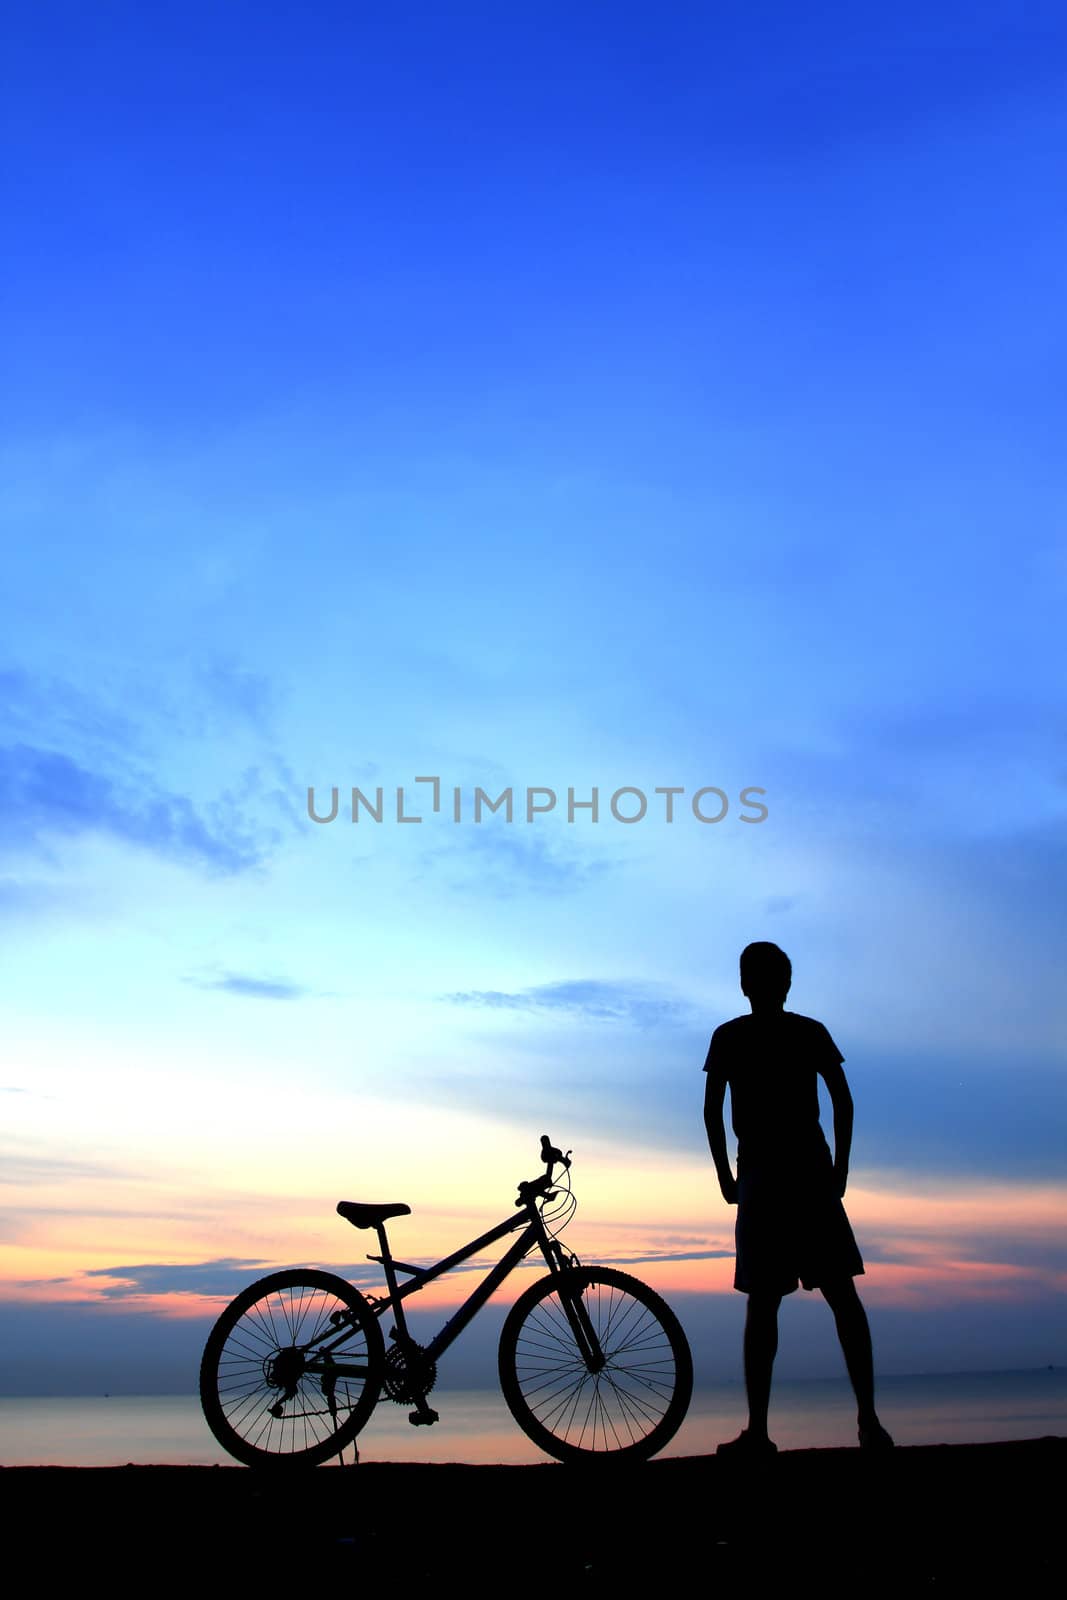 Silhouette of man riding bicycle with beautiful lake near by at  by rufous